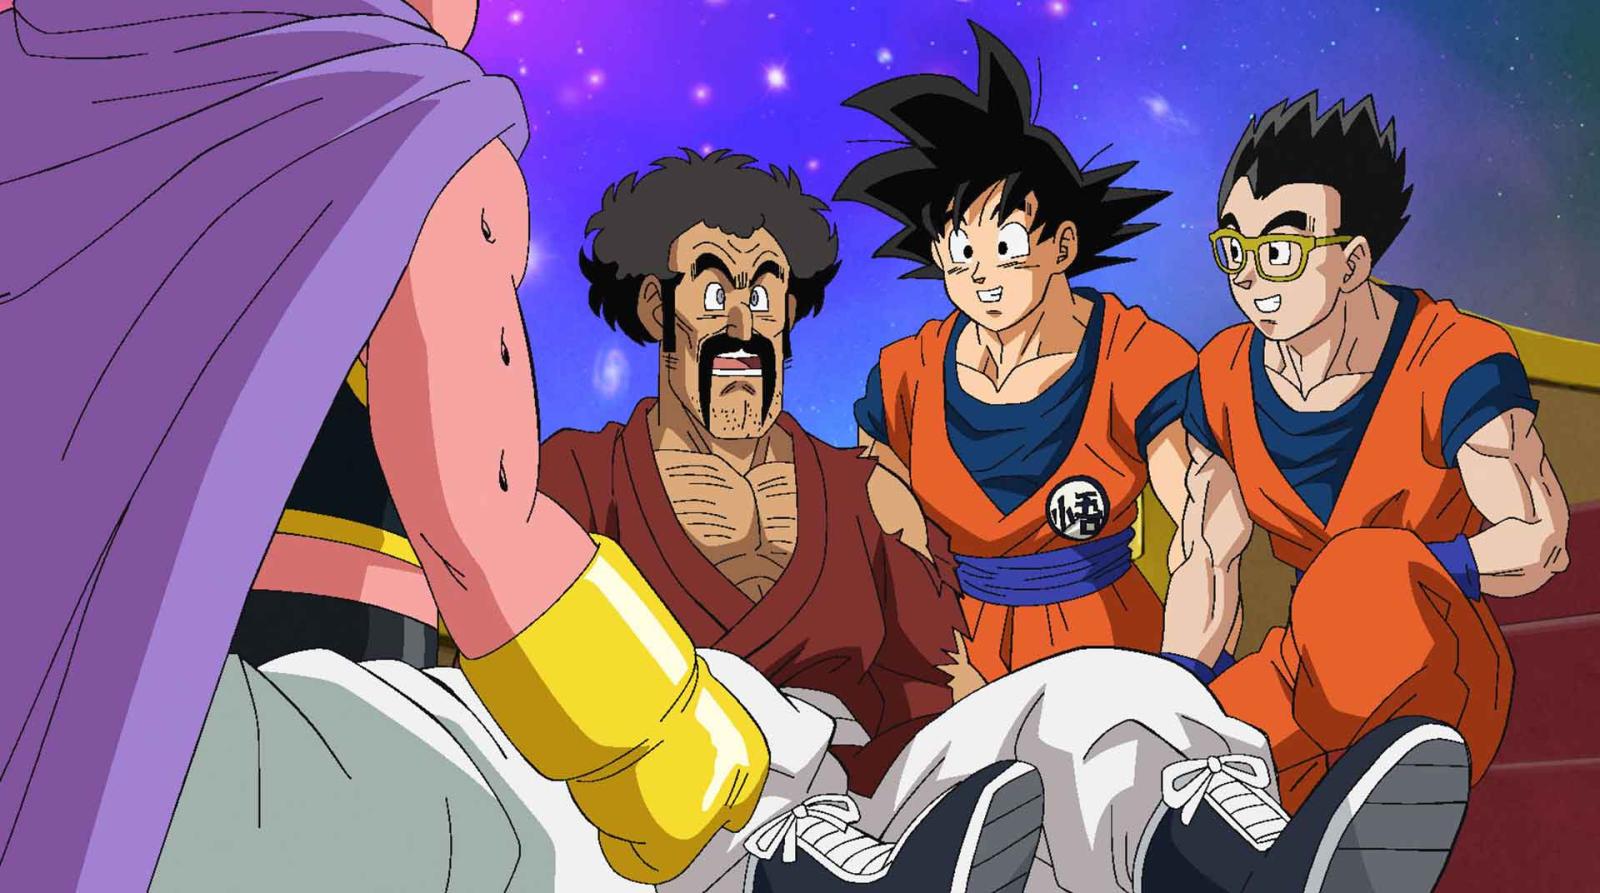 Dragon Ball Super - Volume 7 - Limited Edition 3 DVD + Card + Booklet (DVD) Image 3